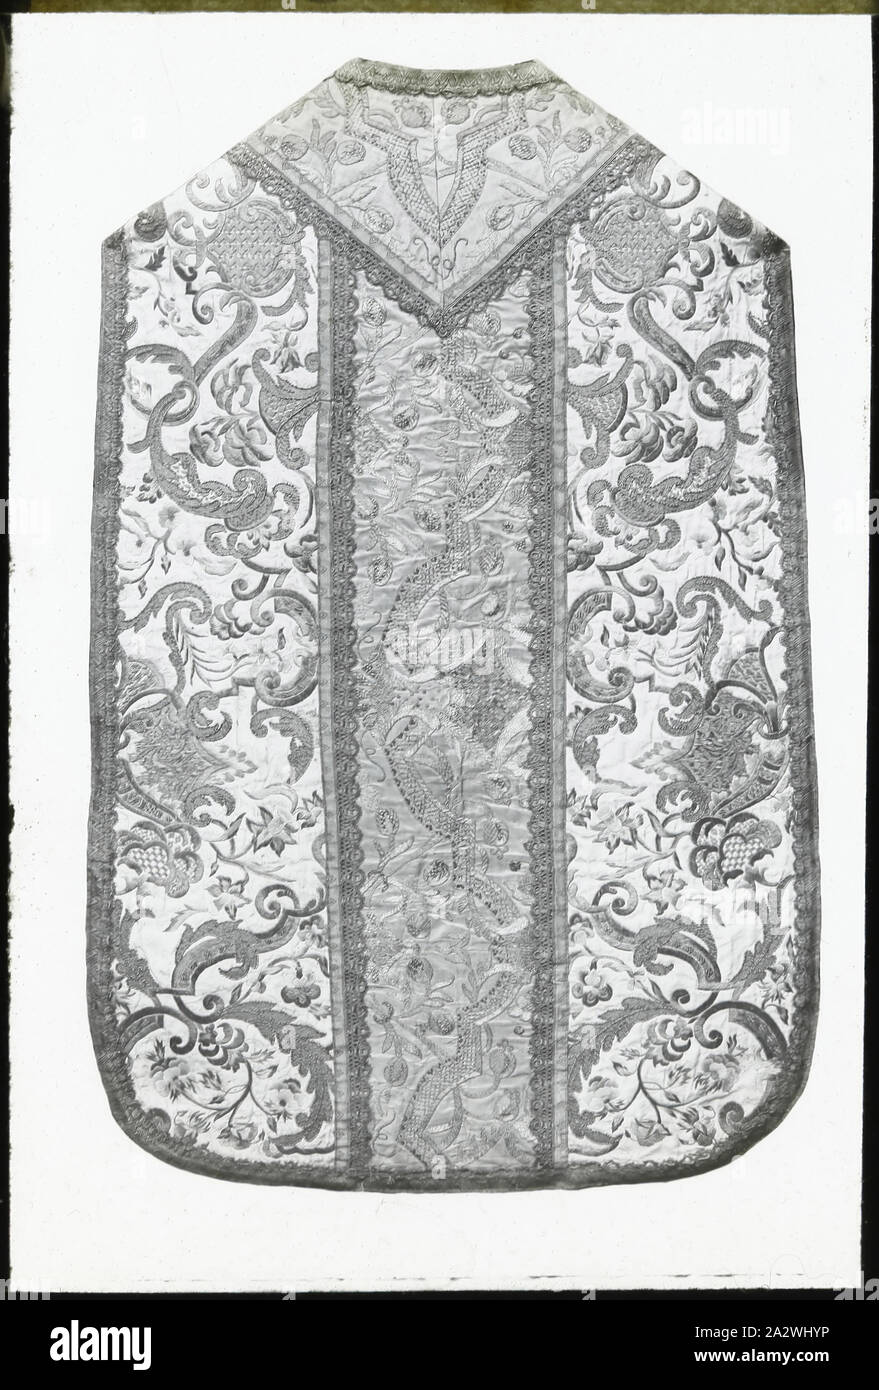 Lantern Slide - Italian Chasuble, 1909-1930, One of a set of ninety photographic magic lantern slides containing images of artefacts, art works, decorative arts, interiors and furniture which appear to belong to various museum and gallery collections in the United Kingdom. The Francis Collection of pre-cinematic apparatus and ephemera was acquired by the Australian and Victorian Governments in 1975 Stock Photo